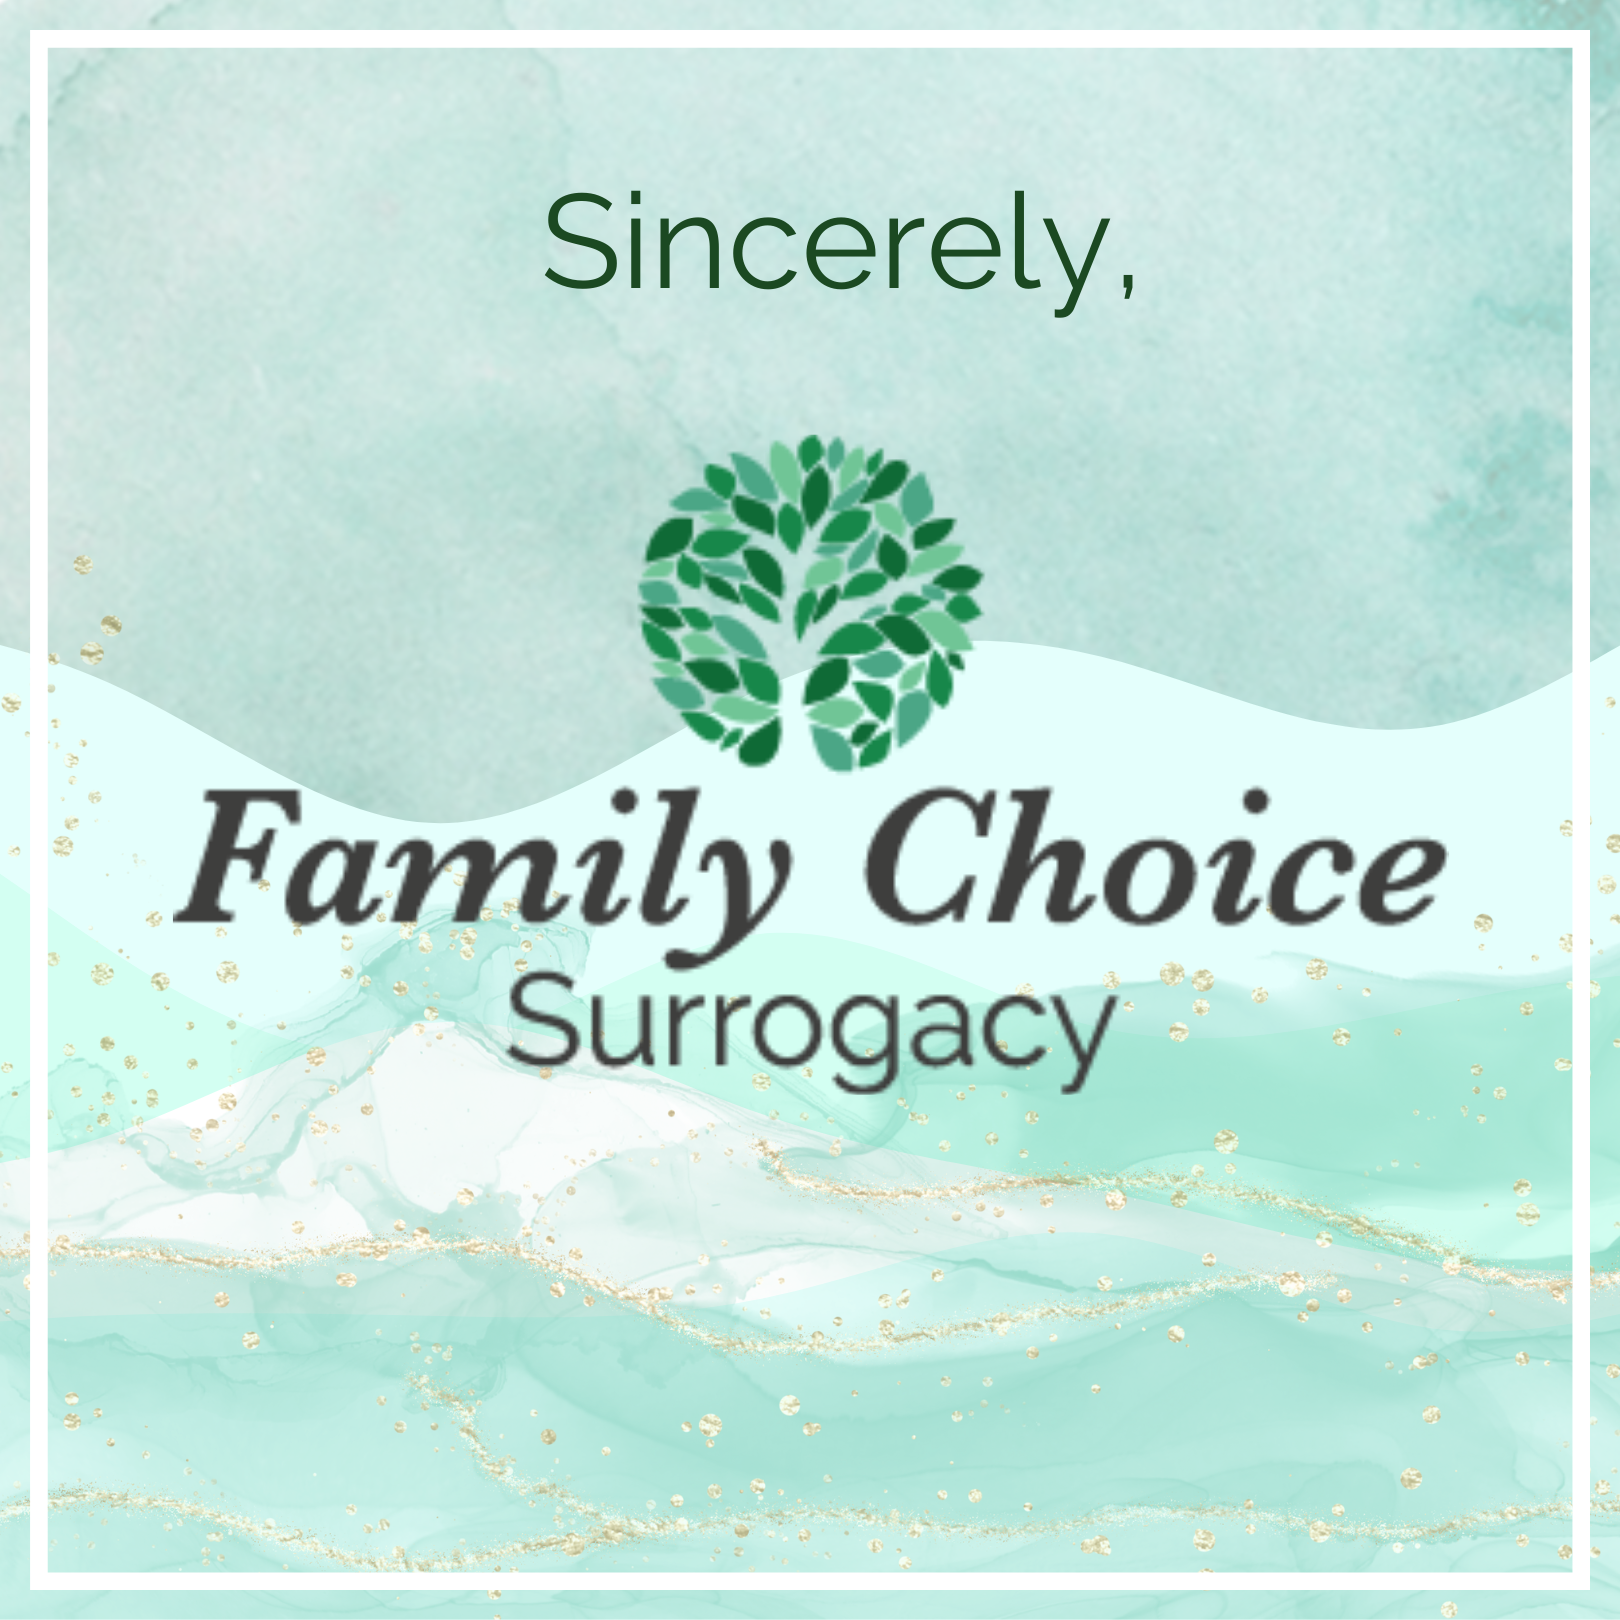 Sincerely, Family Choice Surrogacy